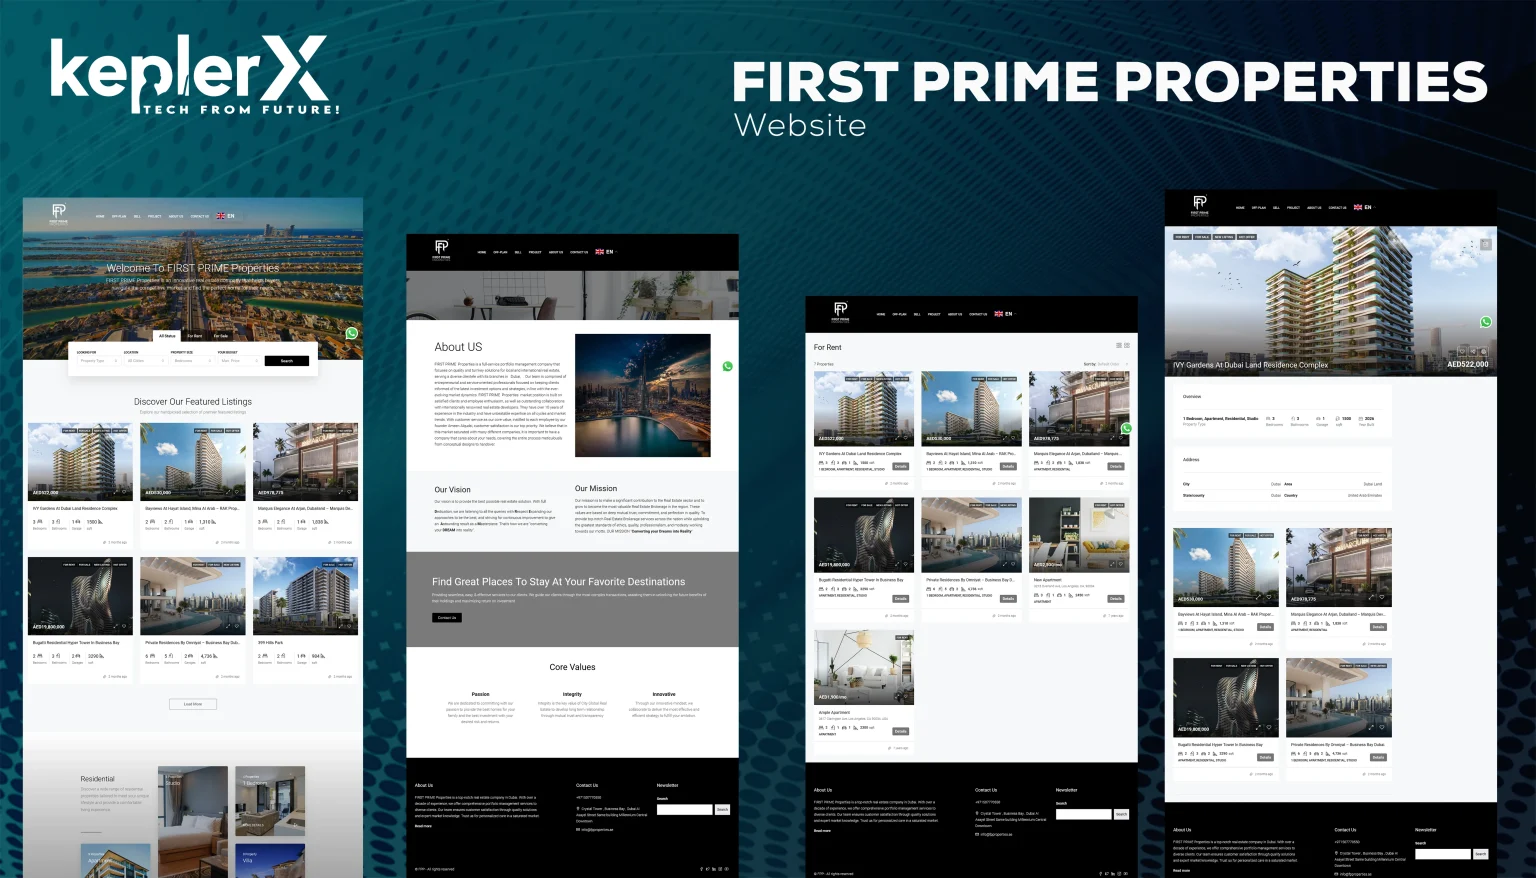 FIRST PRIME PROPERTIES